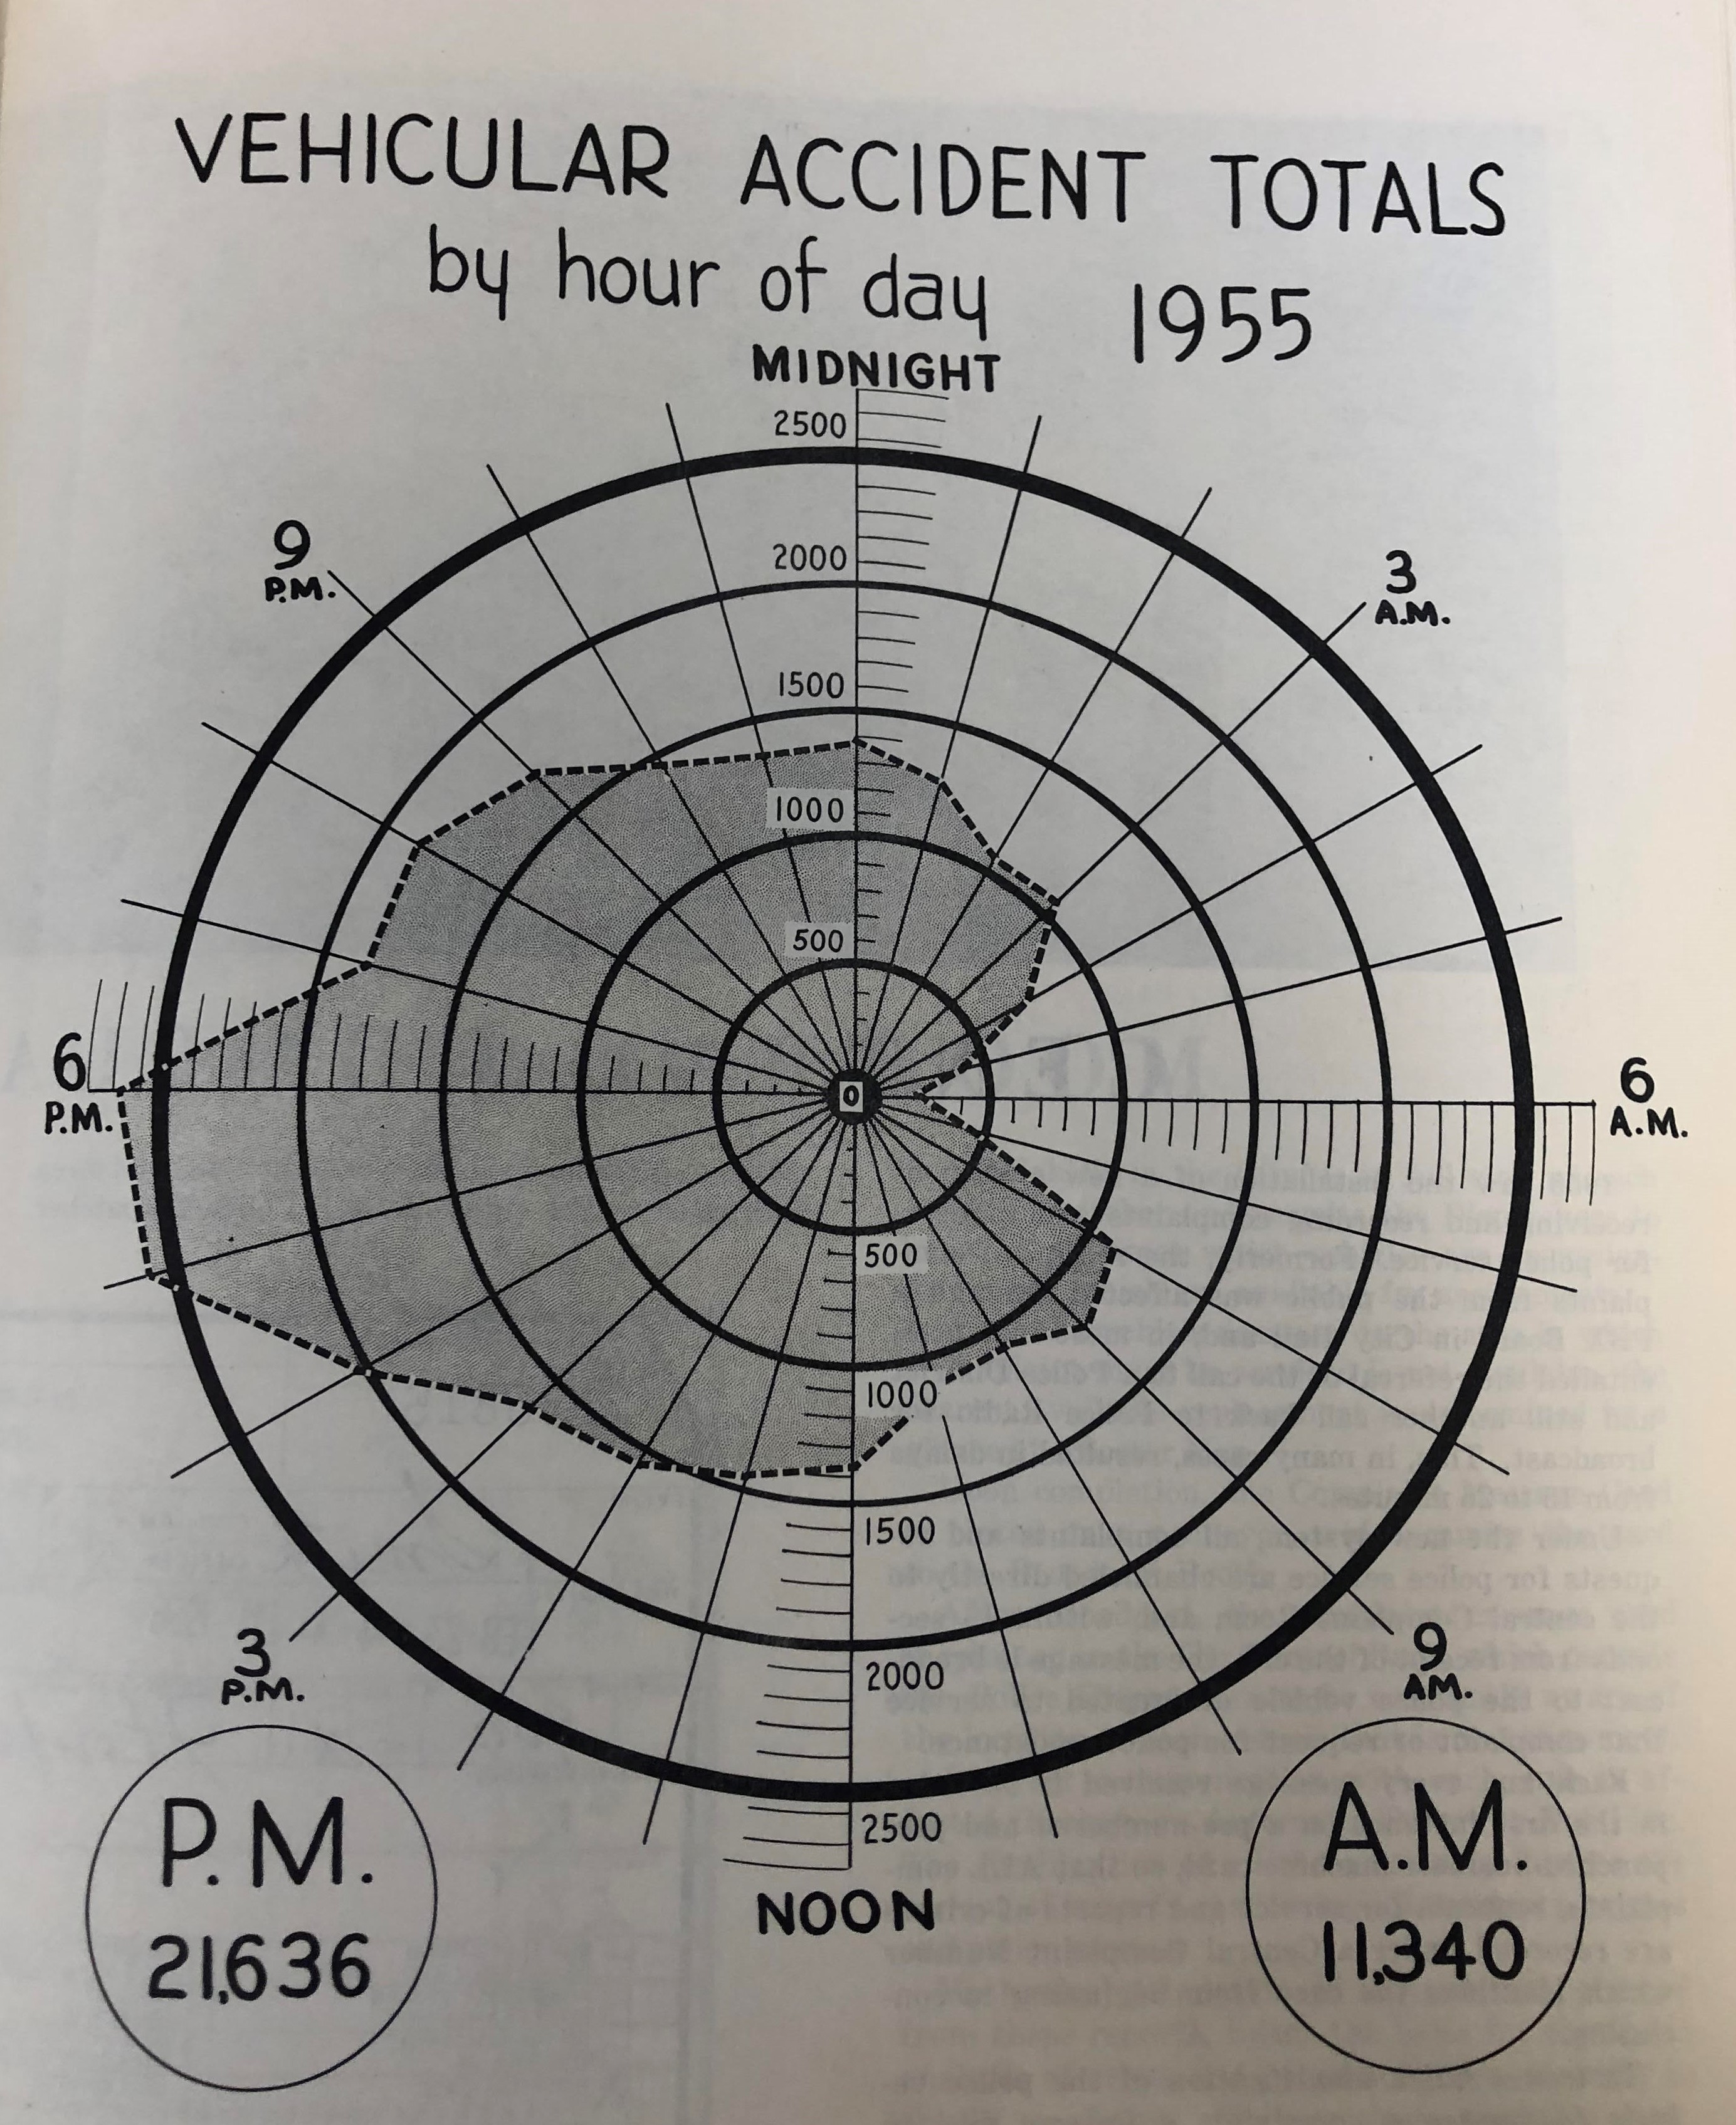 A hand-drawn radar graph from 1955 showing the number of car crashes visualized by time of day